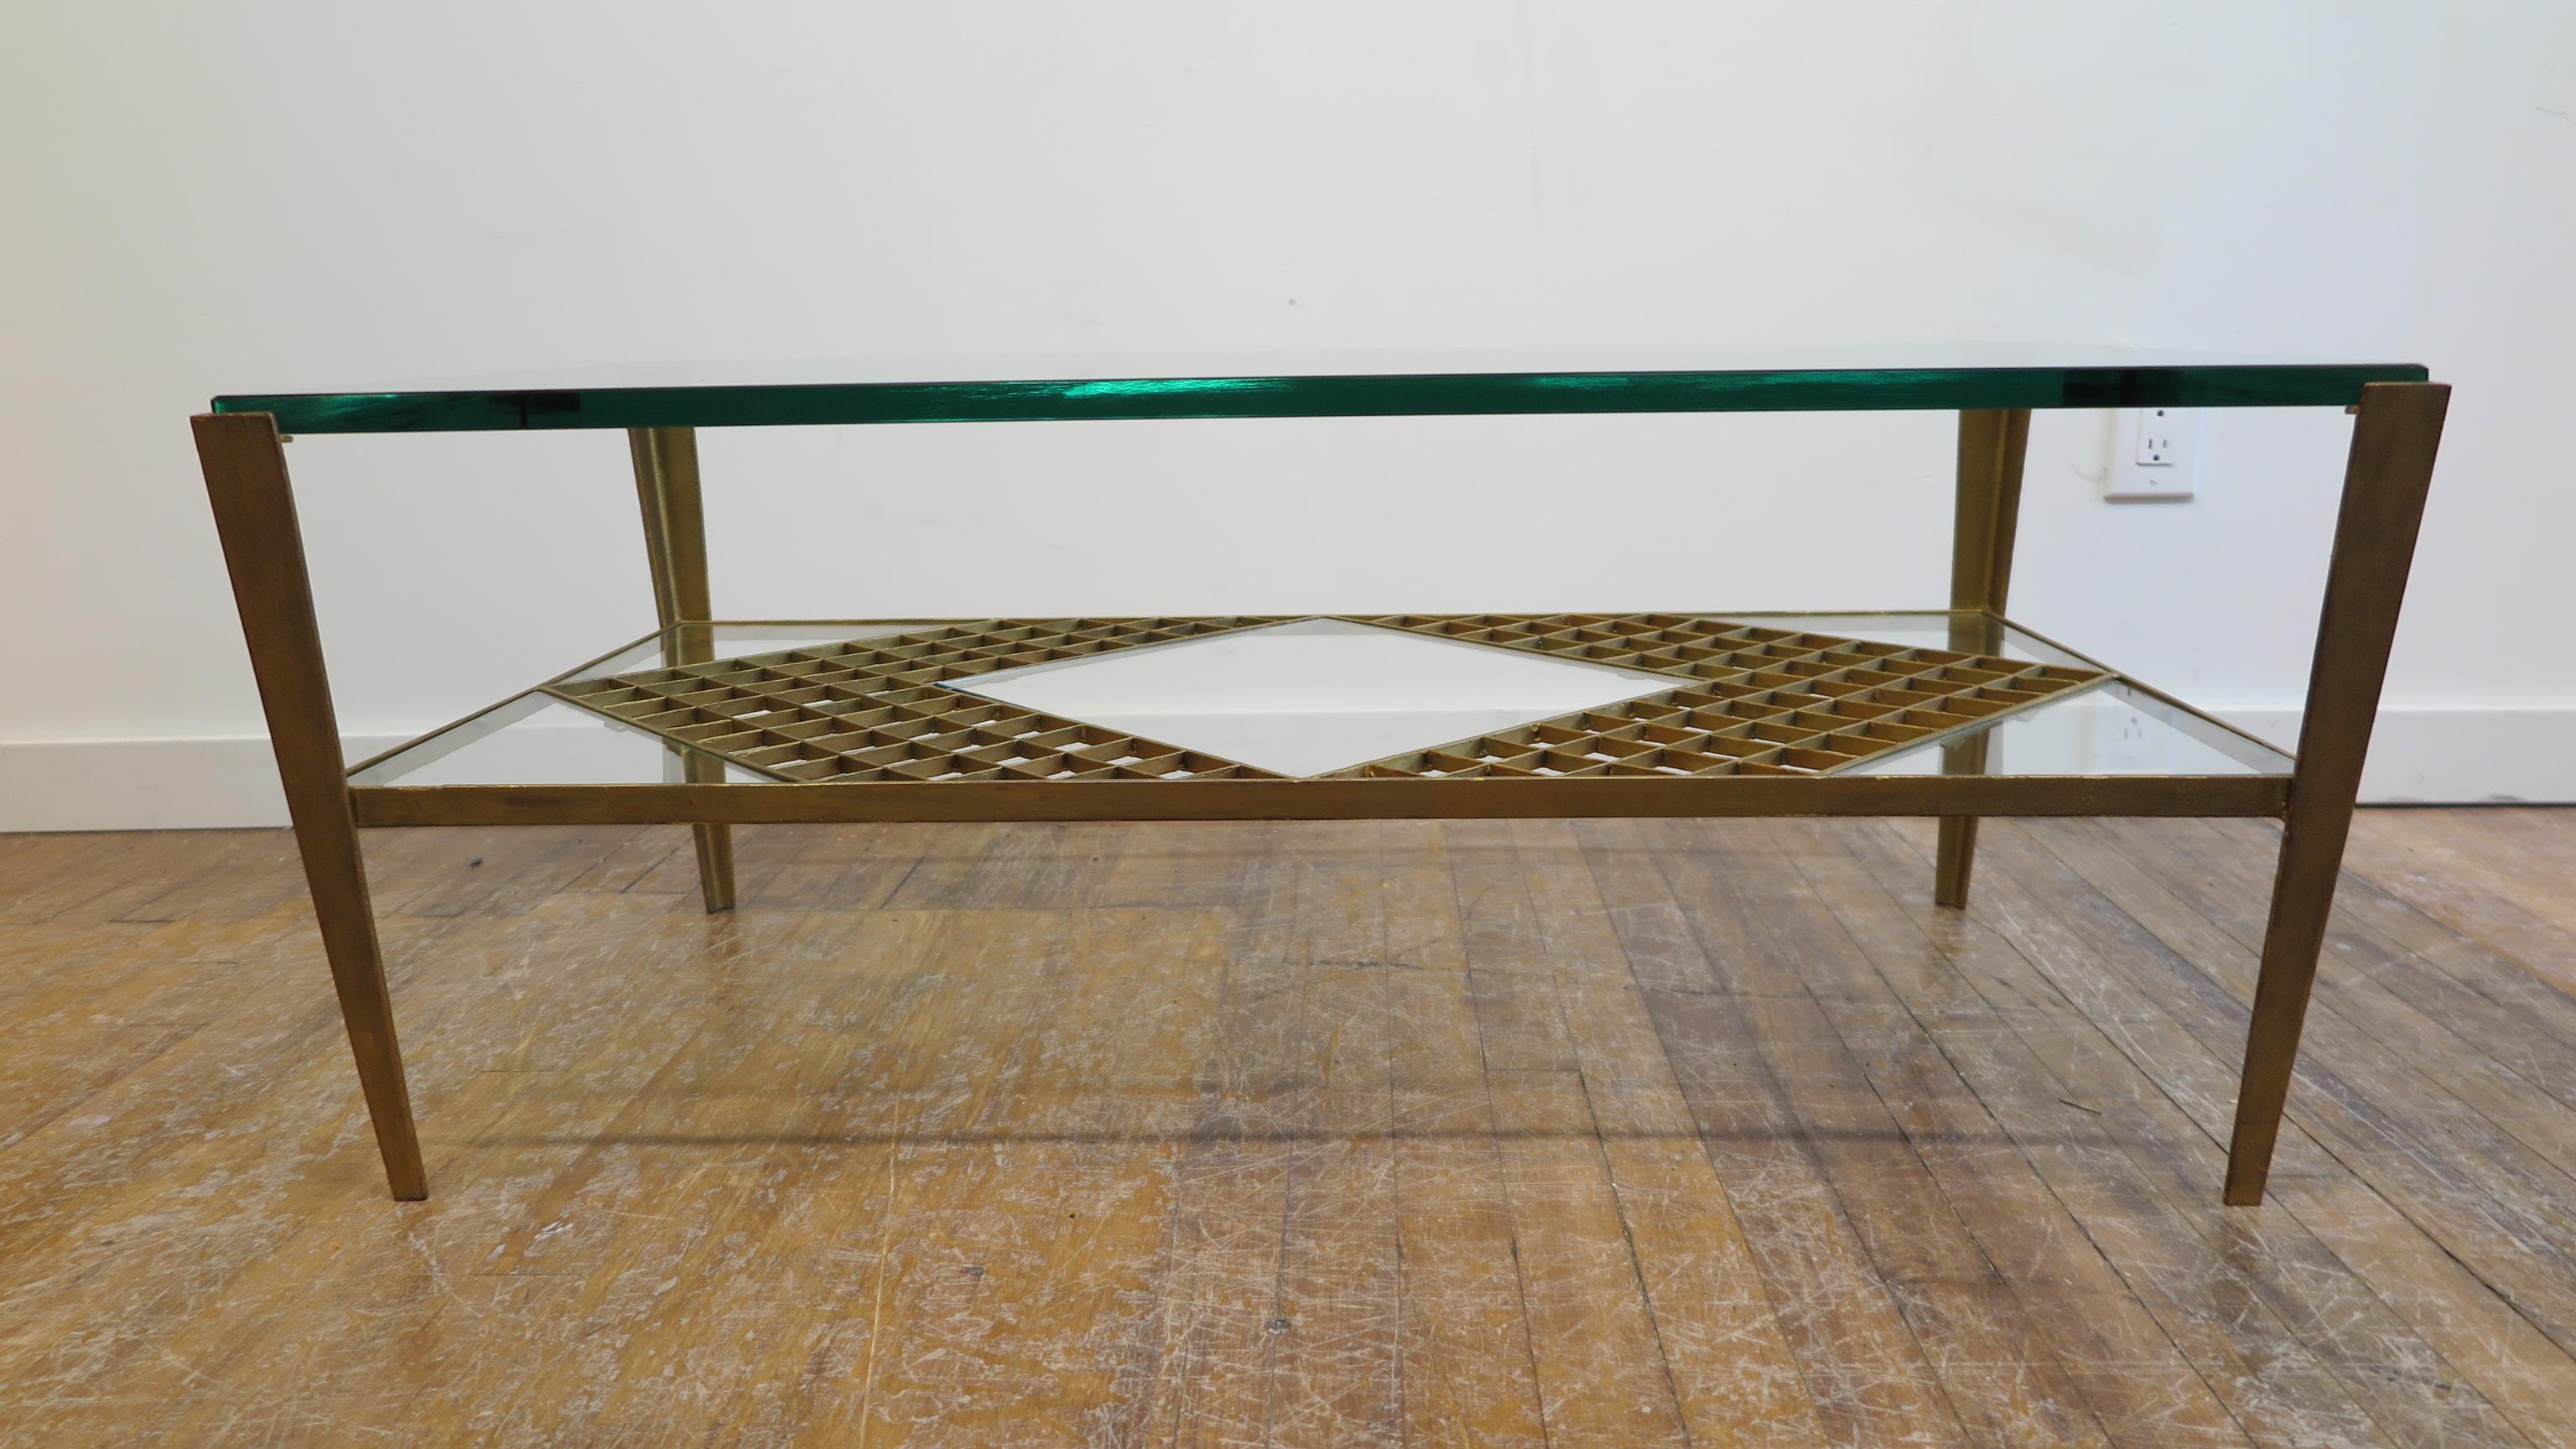 French midcentury glass cocktail table. Gilded Iron frame with inward splayed tapered legs and geometric design to the shelf having five glass inserts. This table is very striking at any angle. Very good condition.